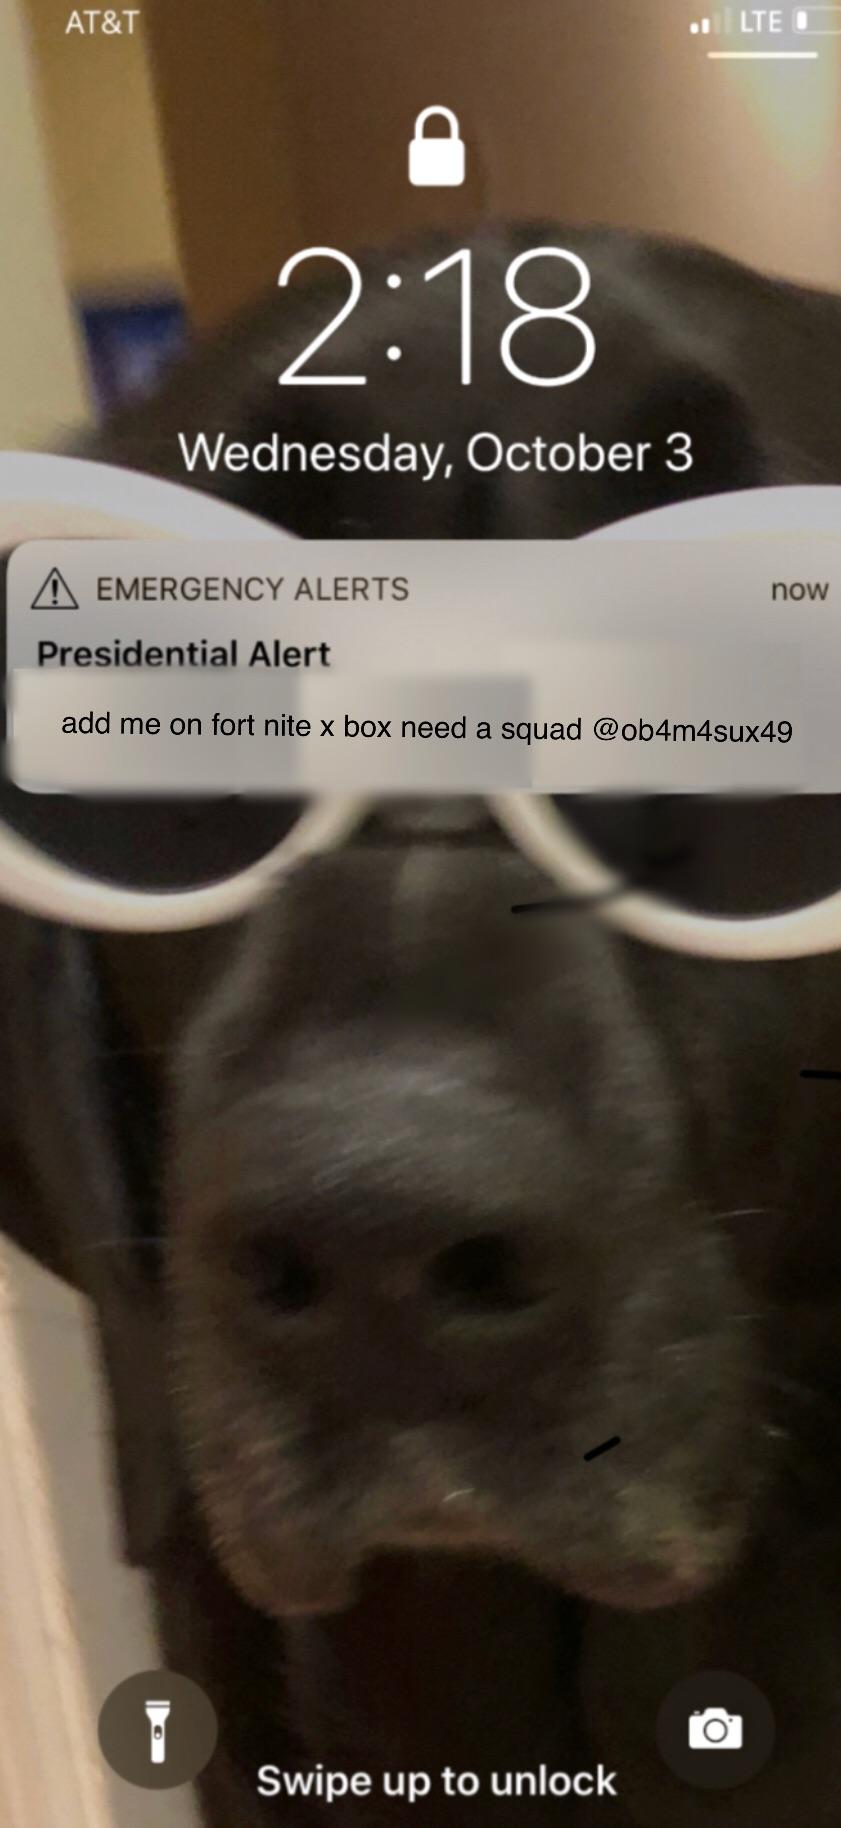 Trump meme of funny presidential alert memes - At&T . Lte 1 Wednesday, October 3 now Aemergency Alerts Presidential Alert add me on fort nite x box need a squad Swipe up to unlock